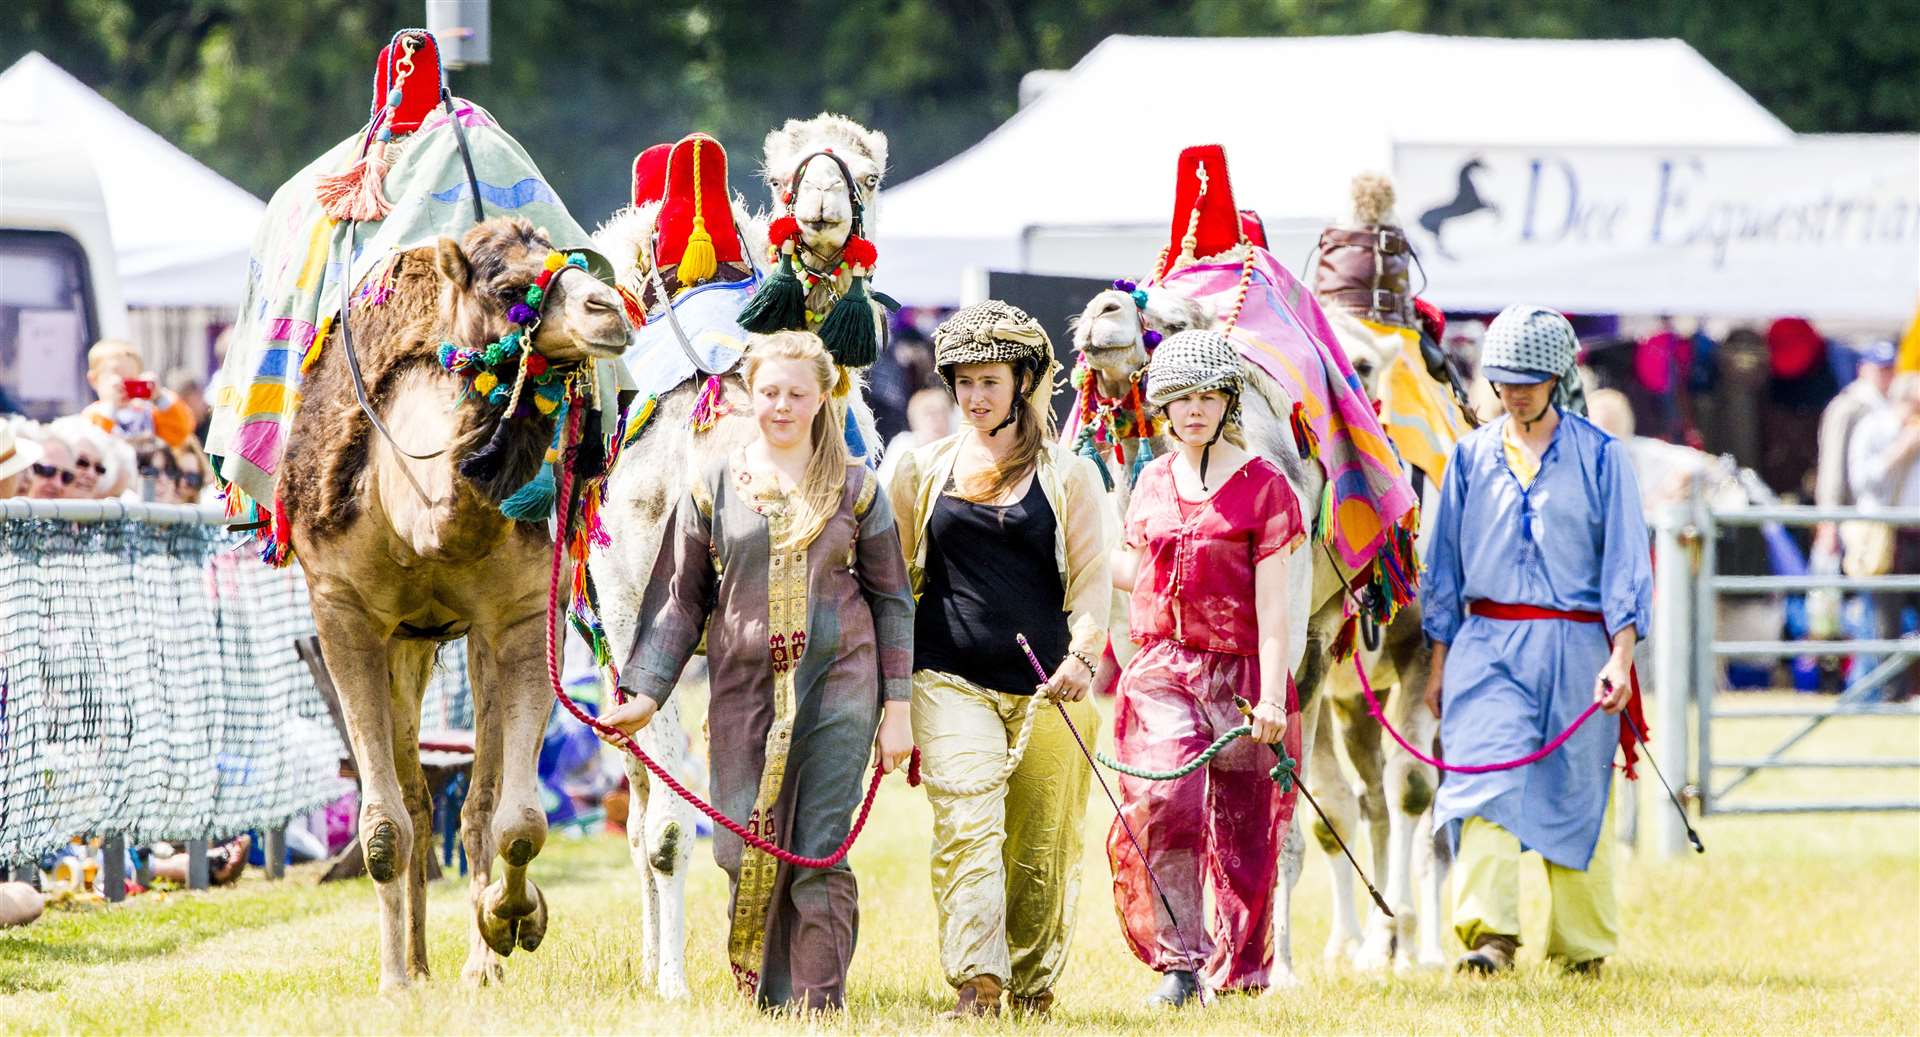 Racing camels are coming to the Kent County Show in 2020